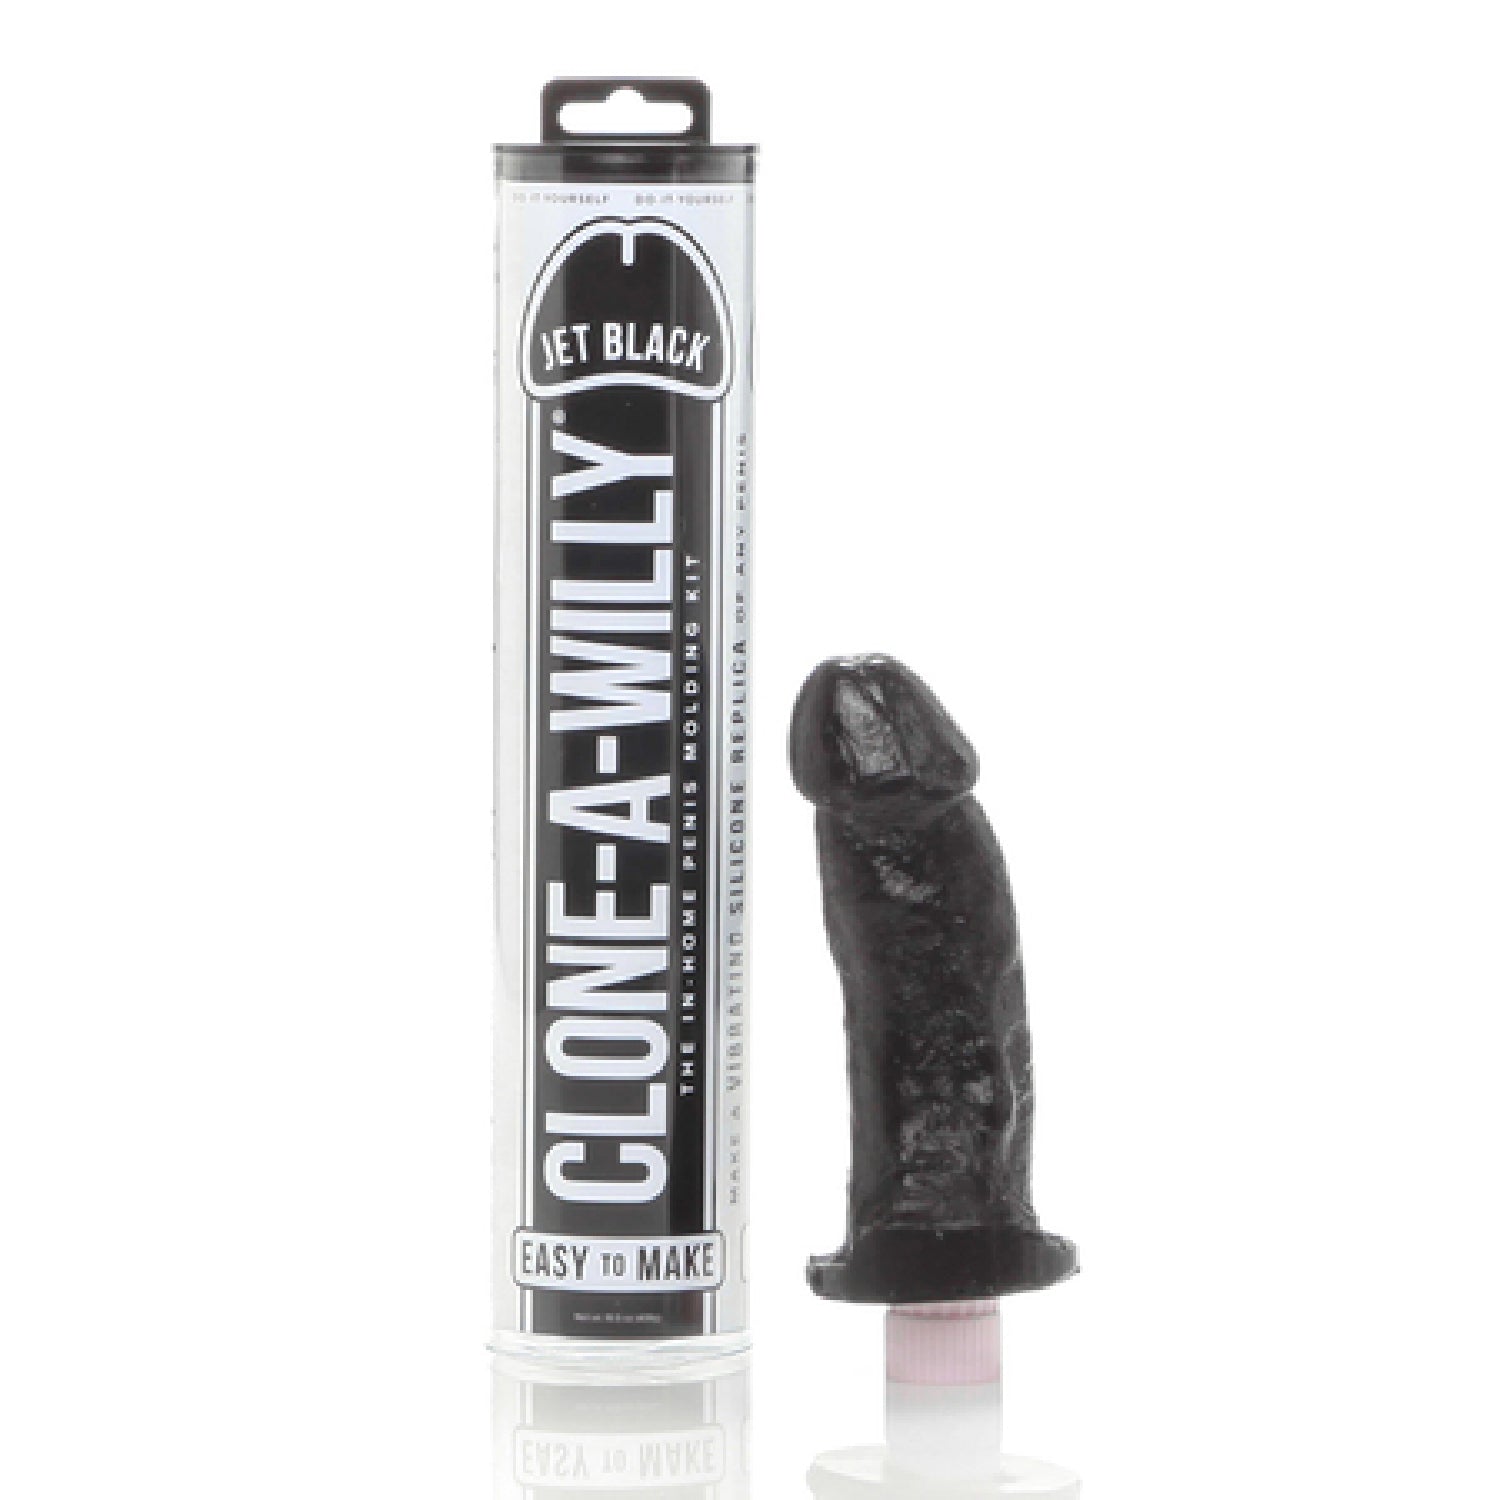 Clone-A-Willy Vibrator